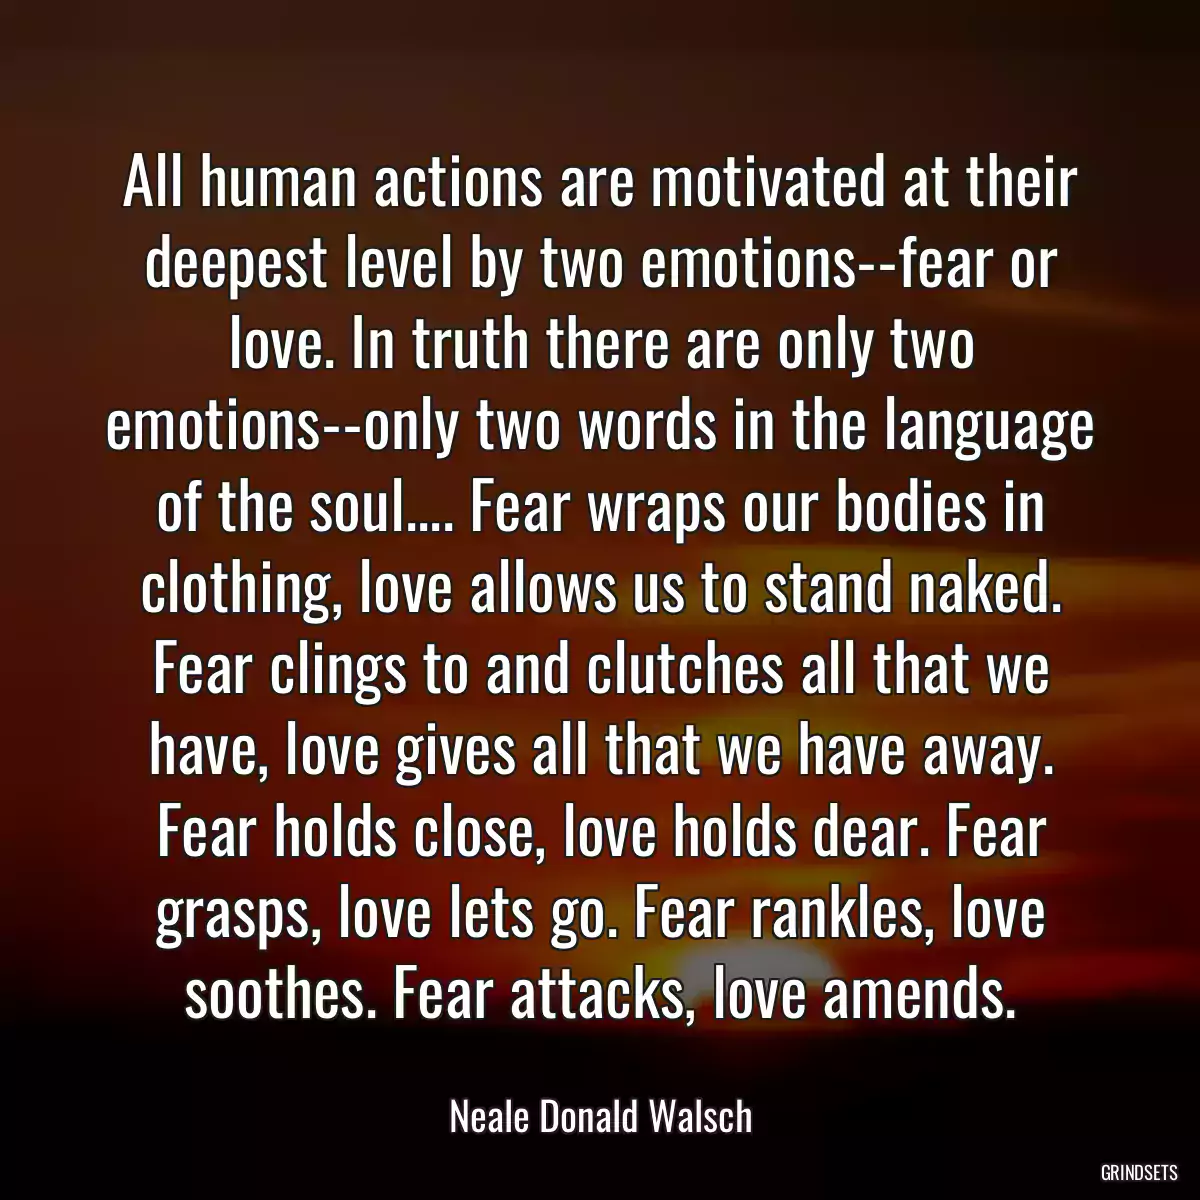 All human actions are motivated at their deepest level by two emotions--fear or love. In truth there are only two emotions--only two words in the language of the soul.... Fear wraps our bodies in clothing, love allows us to stand naked. Fear clings to and clutches all that we have, love gives all that we have away. Fear holds close, love holds dear. Fear grasps, love lets go. Fear rankles, love soothes. Fear attacks, love amends.